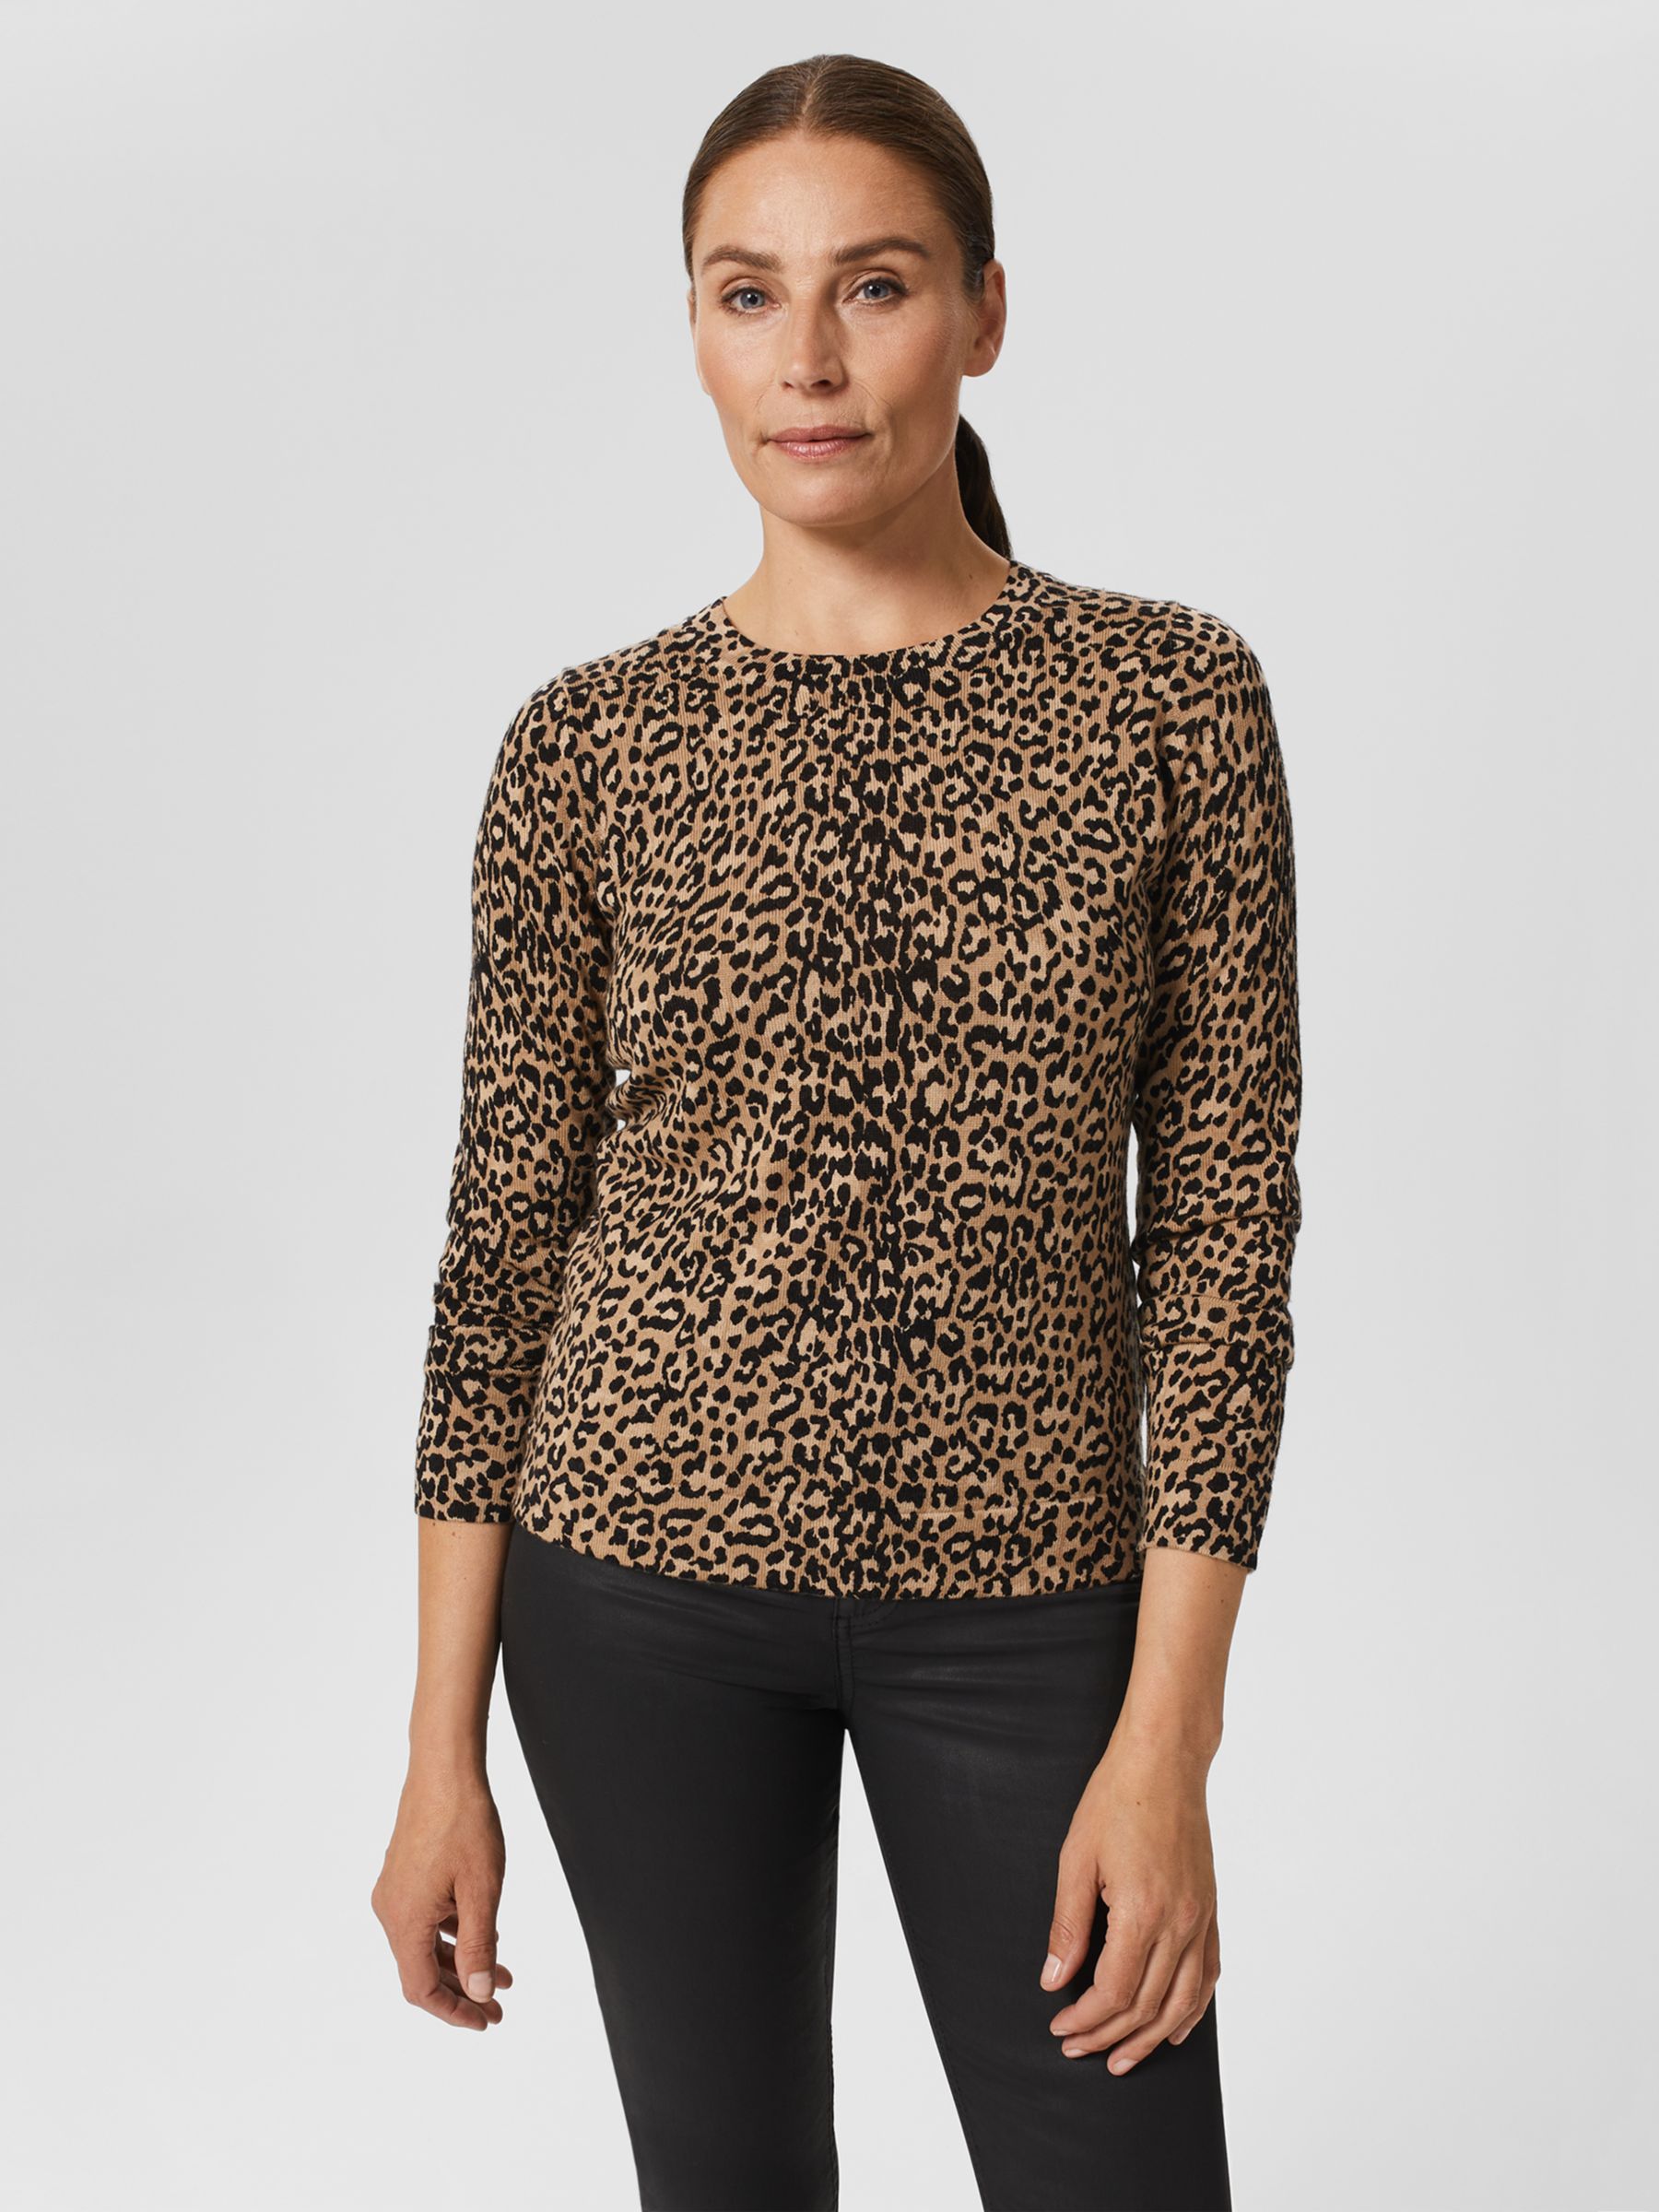 EQUIPMENT Size XS Black and Tan Cheetah Print Wool Pullover For